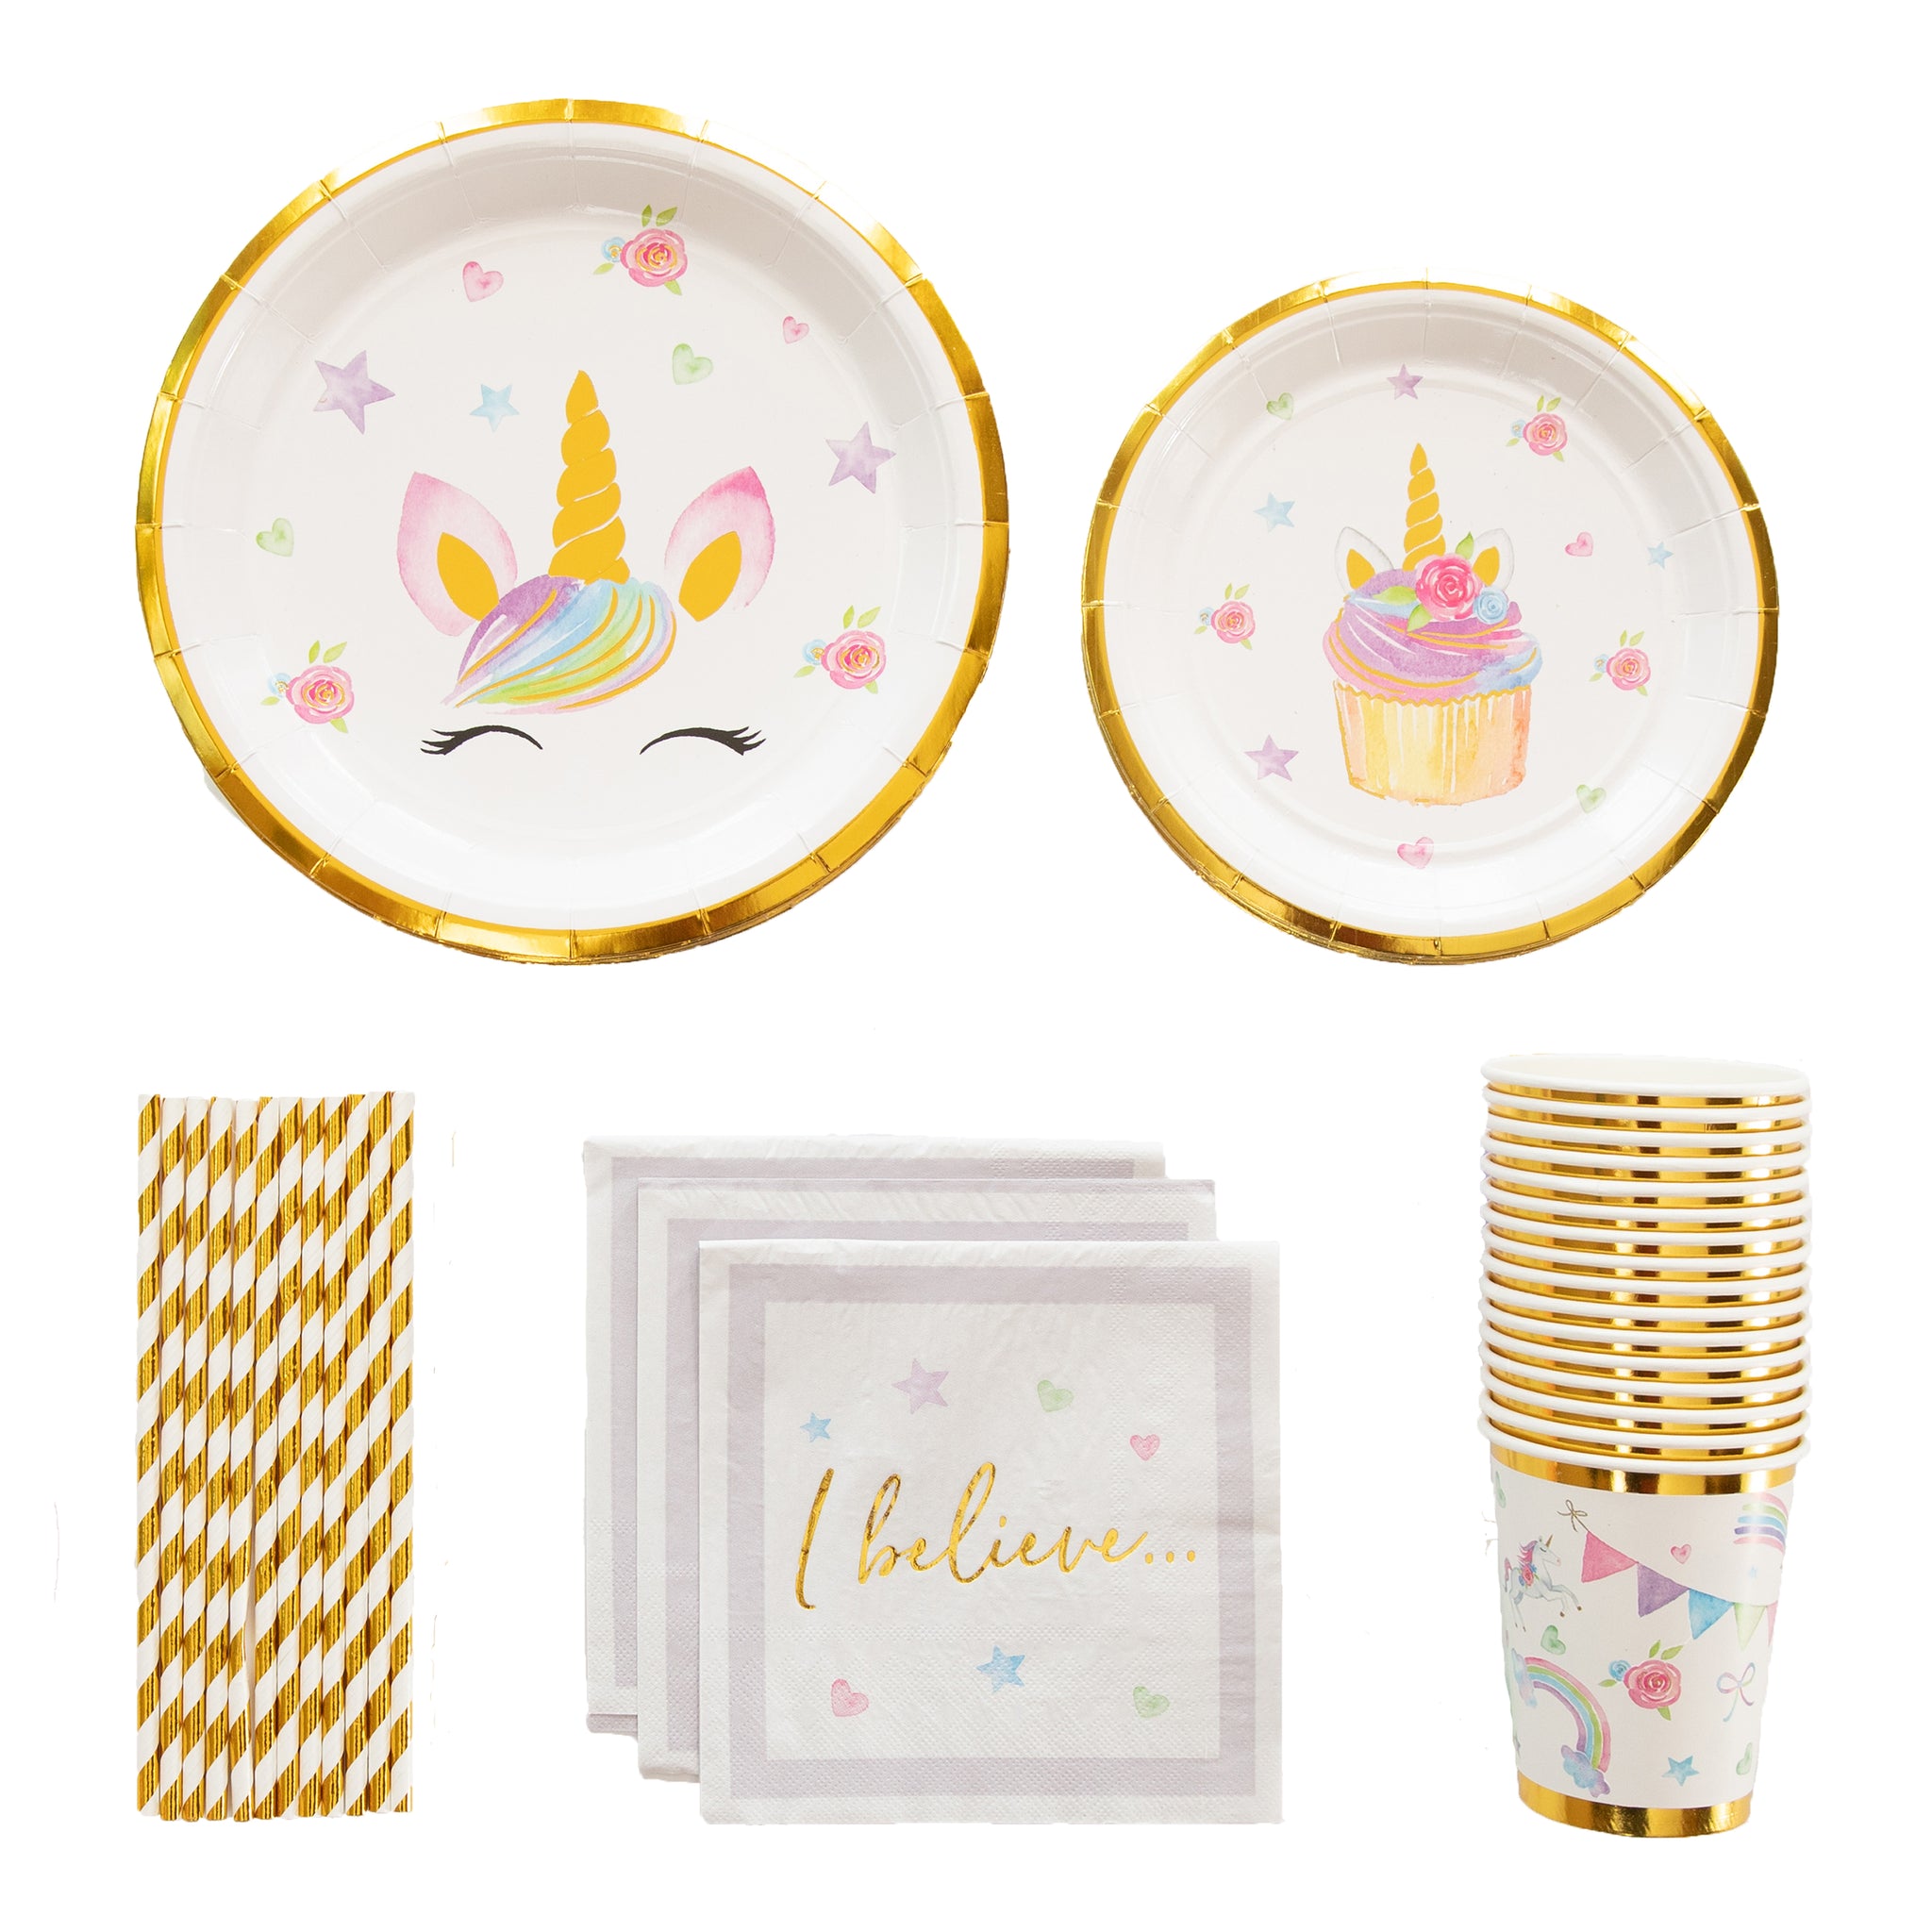 Unicorn Party Supplies Set | Stunning Real Gold Foil | Serves 16